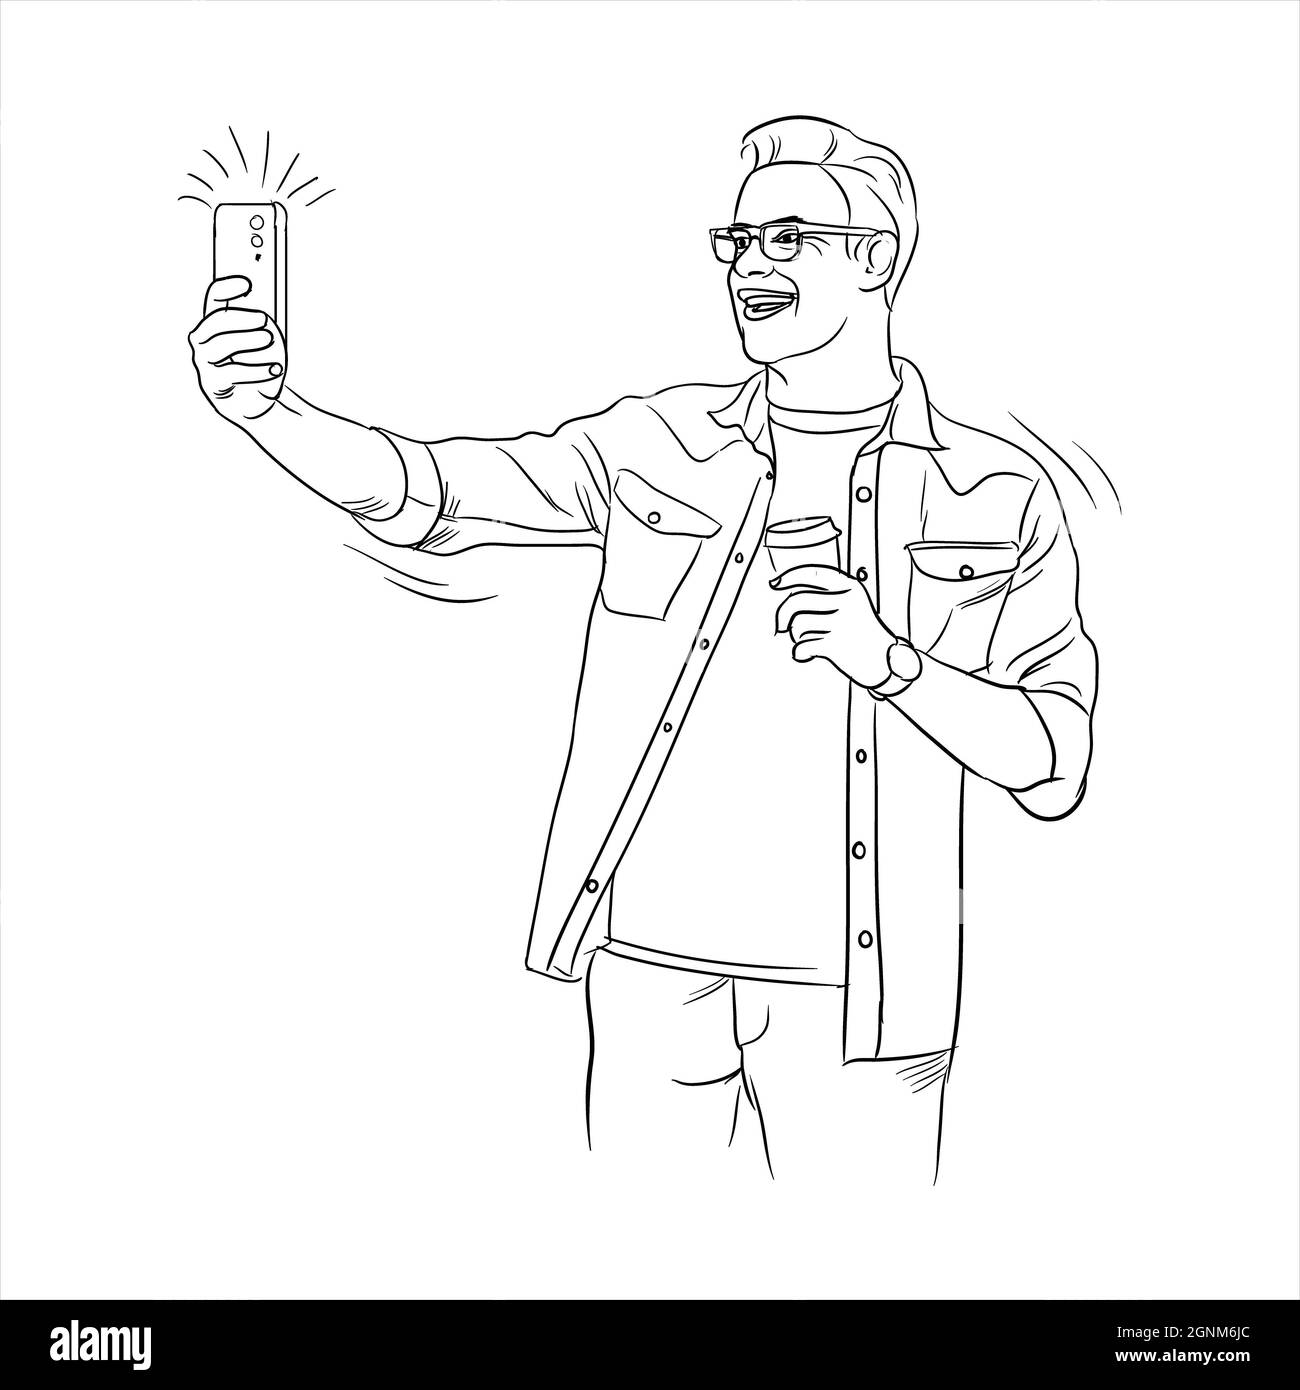 https://c8.alamy.com/comp/2GNM6JC/a-smart-happy-young-man-with-eyeglass-taking-selfies-and-video-calls-with-a-smartphone-line-art-drawing-vector-illustration-fashionable-modern-guy-2GNM6JC.jpg